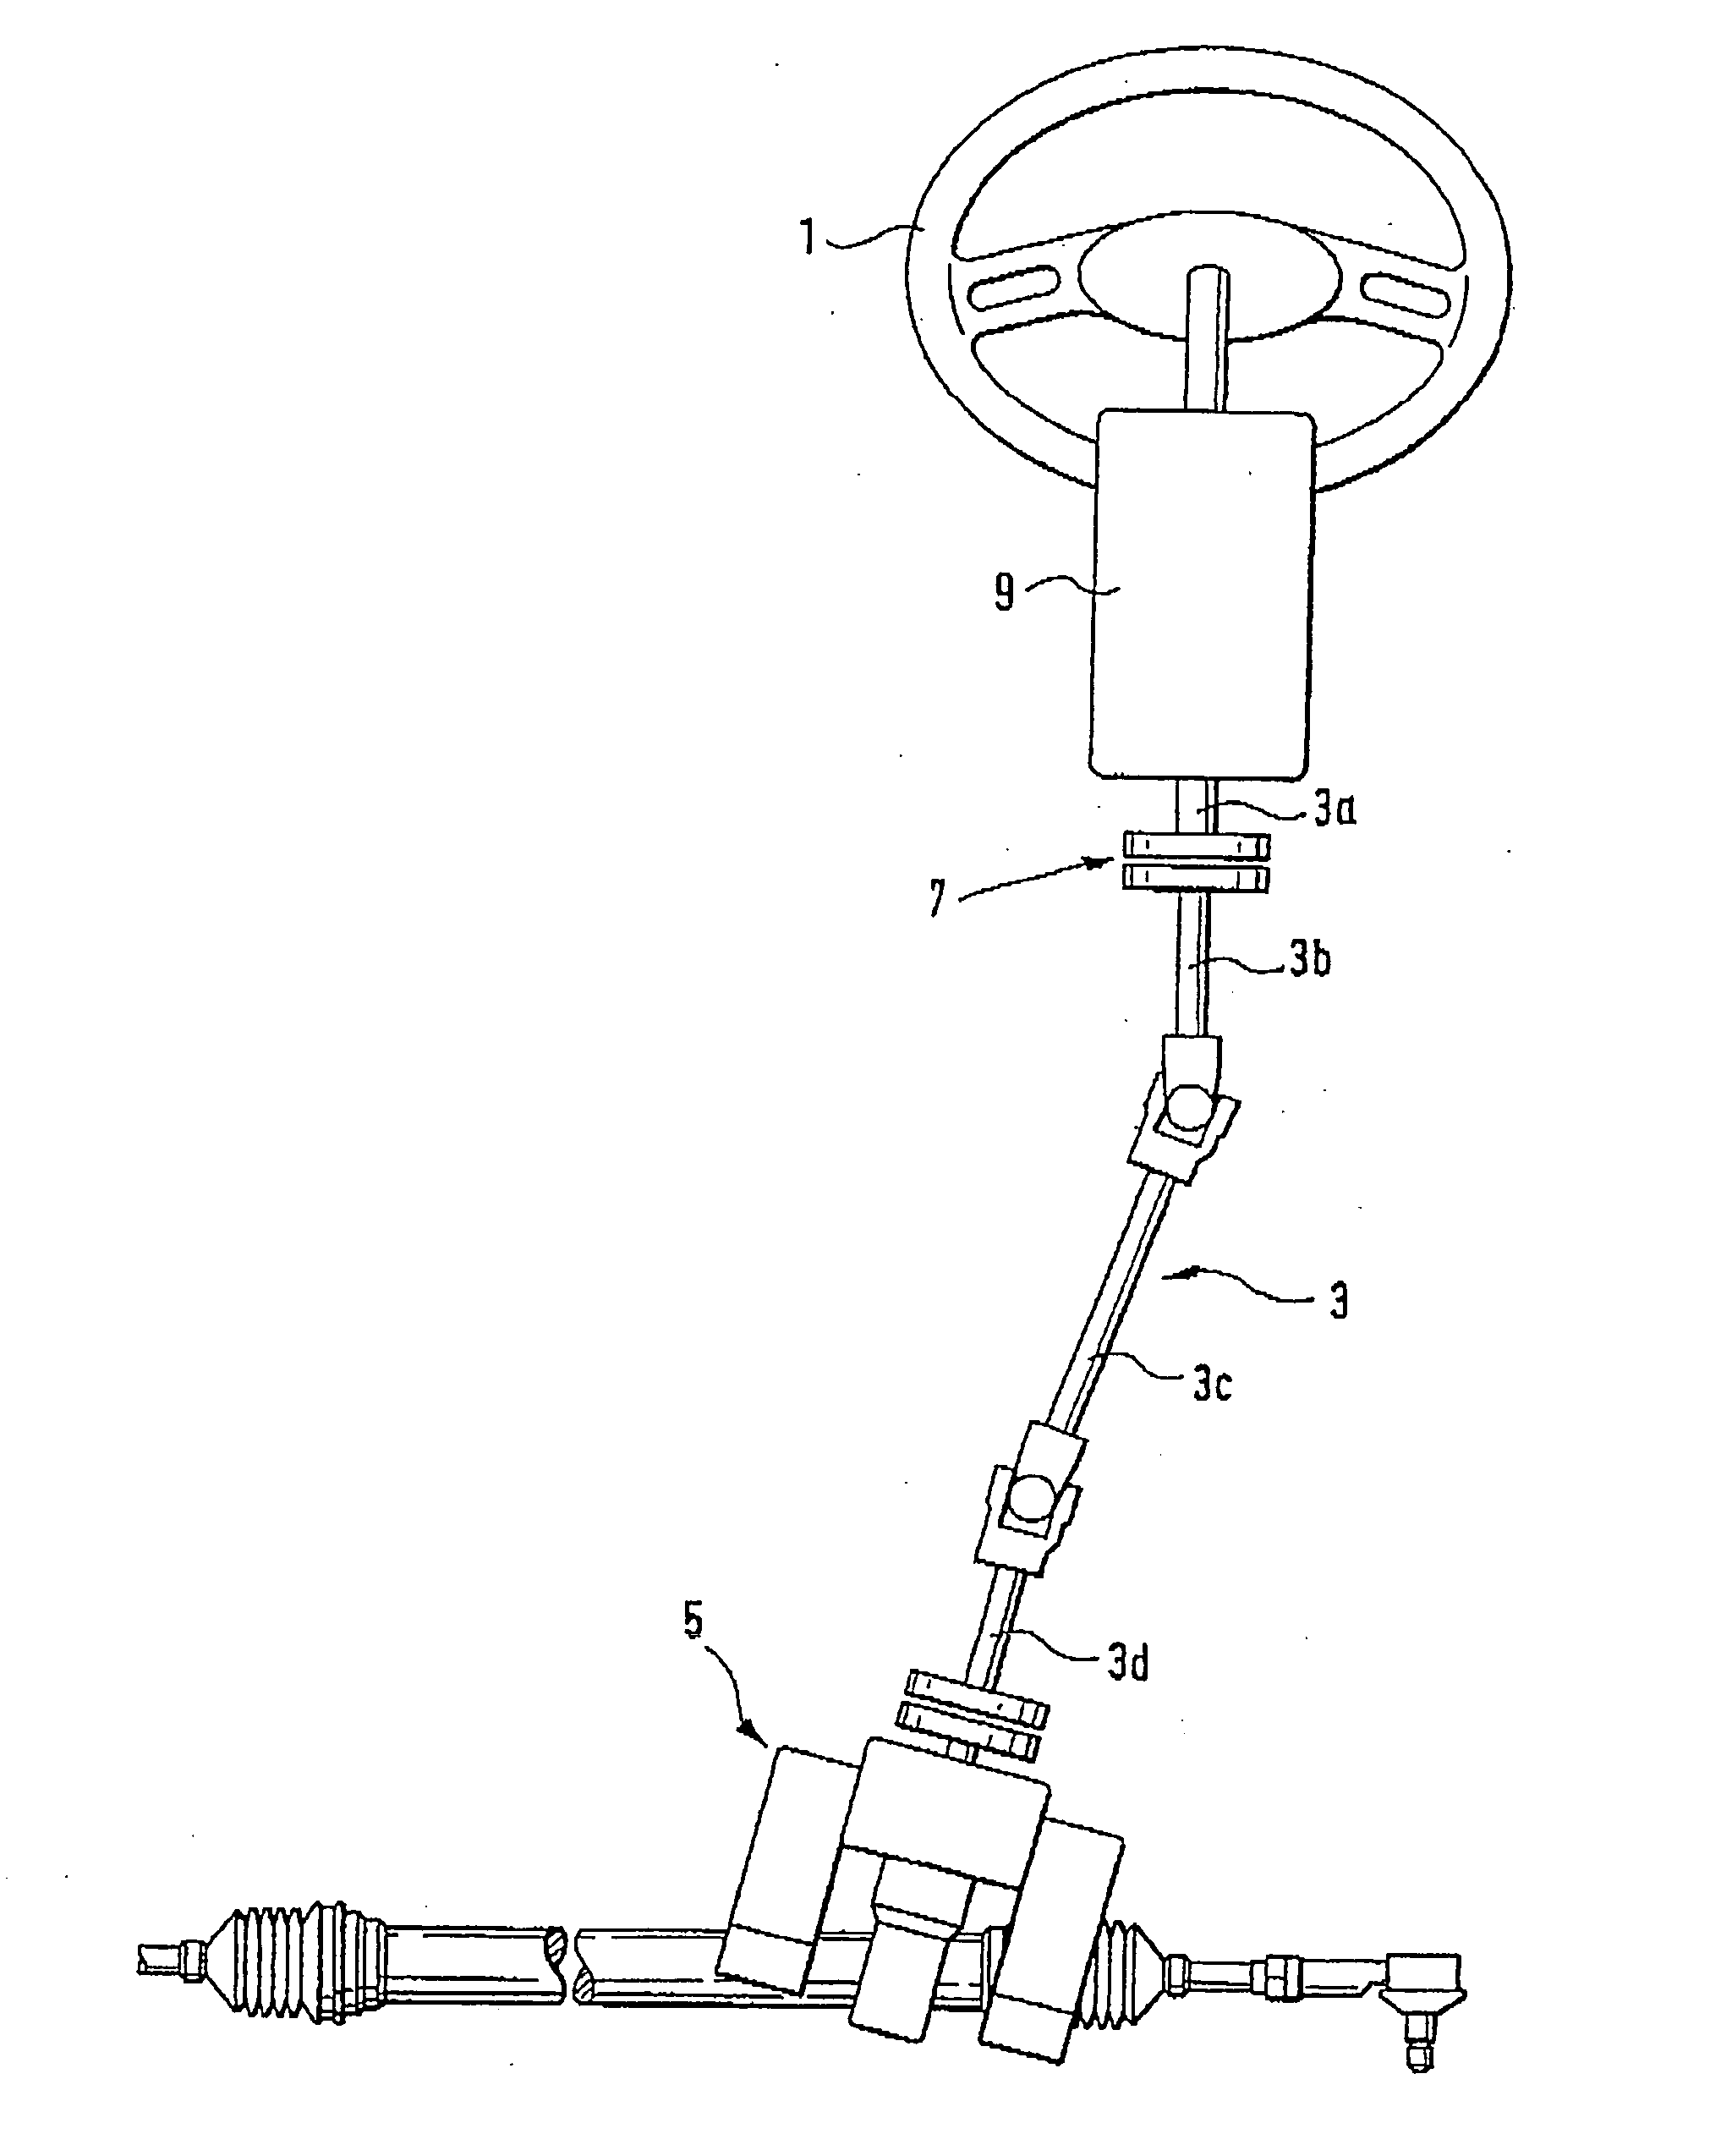 Clutch for steer-by-wire steering system